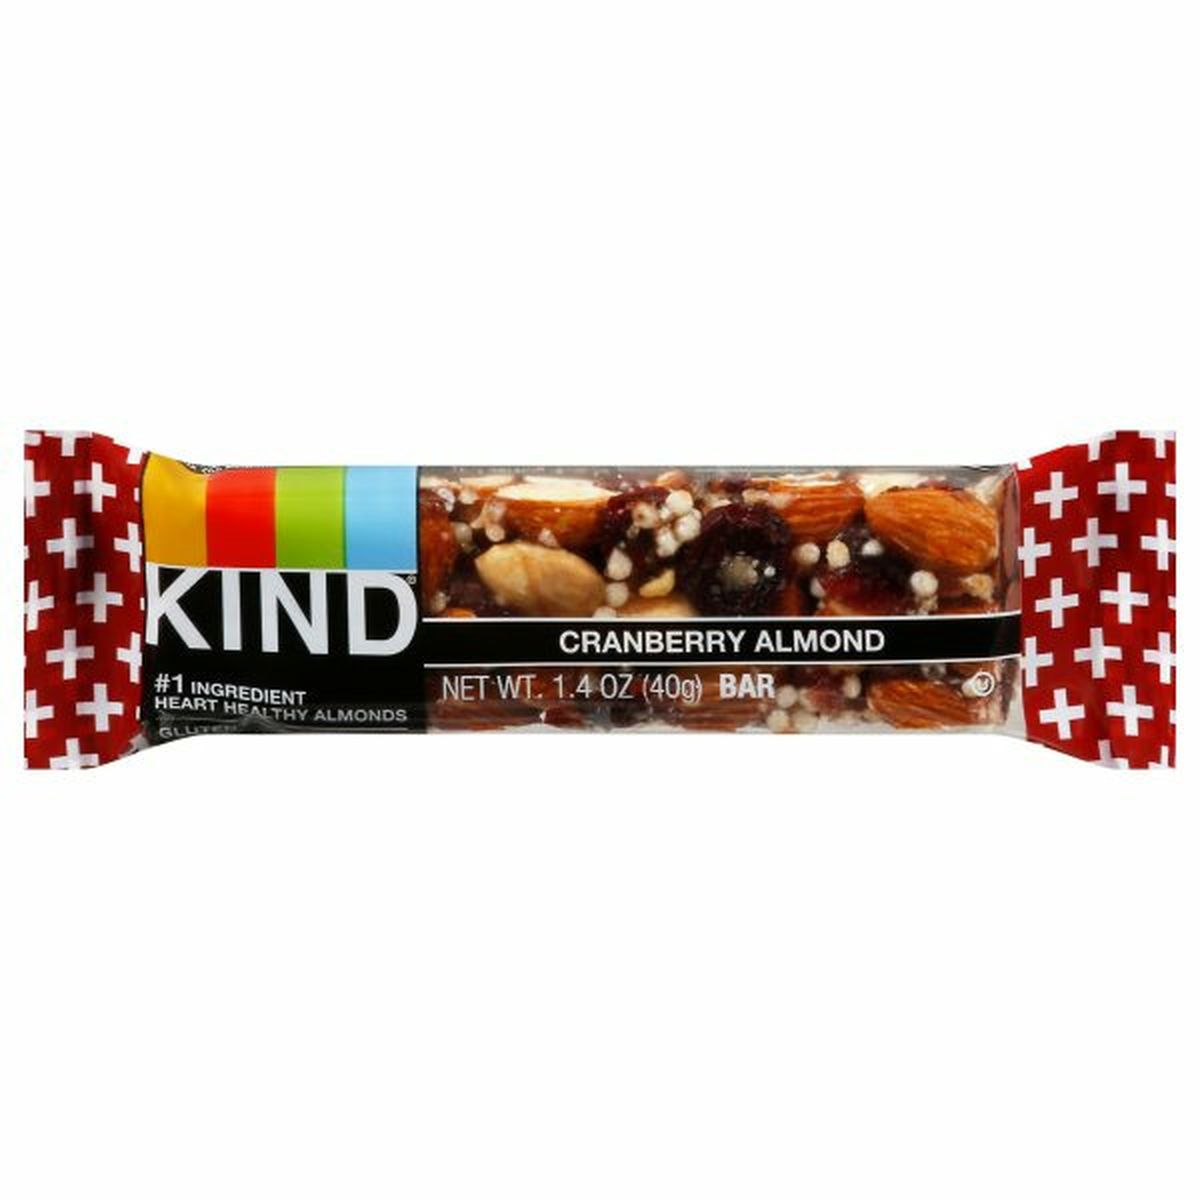 Calories in KIND Bar, Cranberry Almond